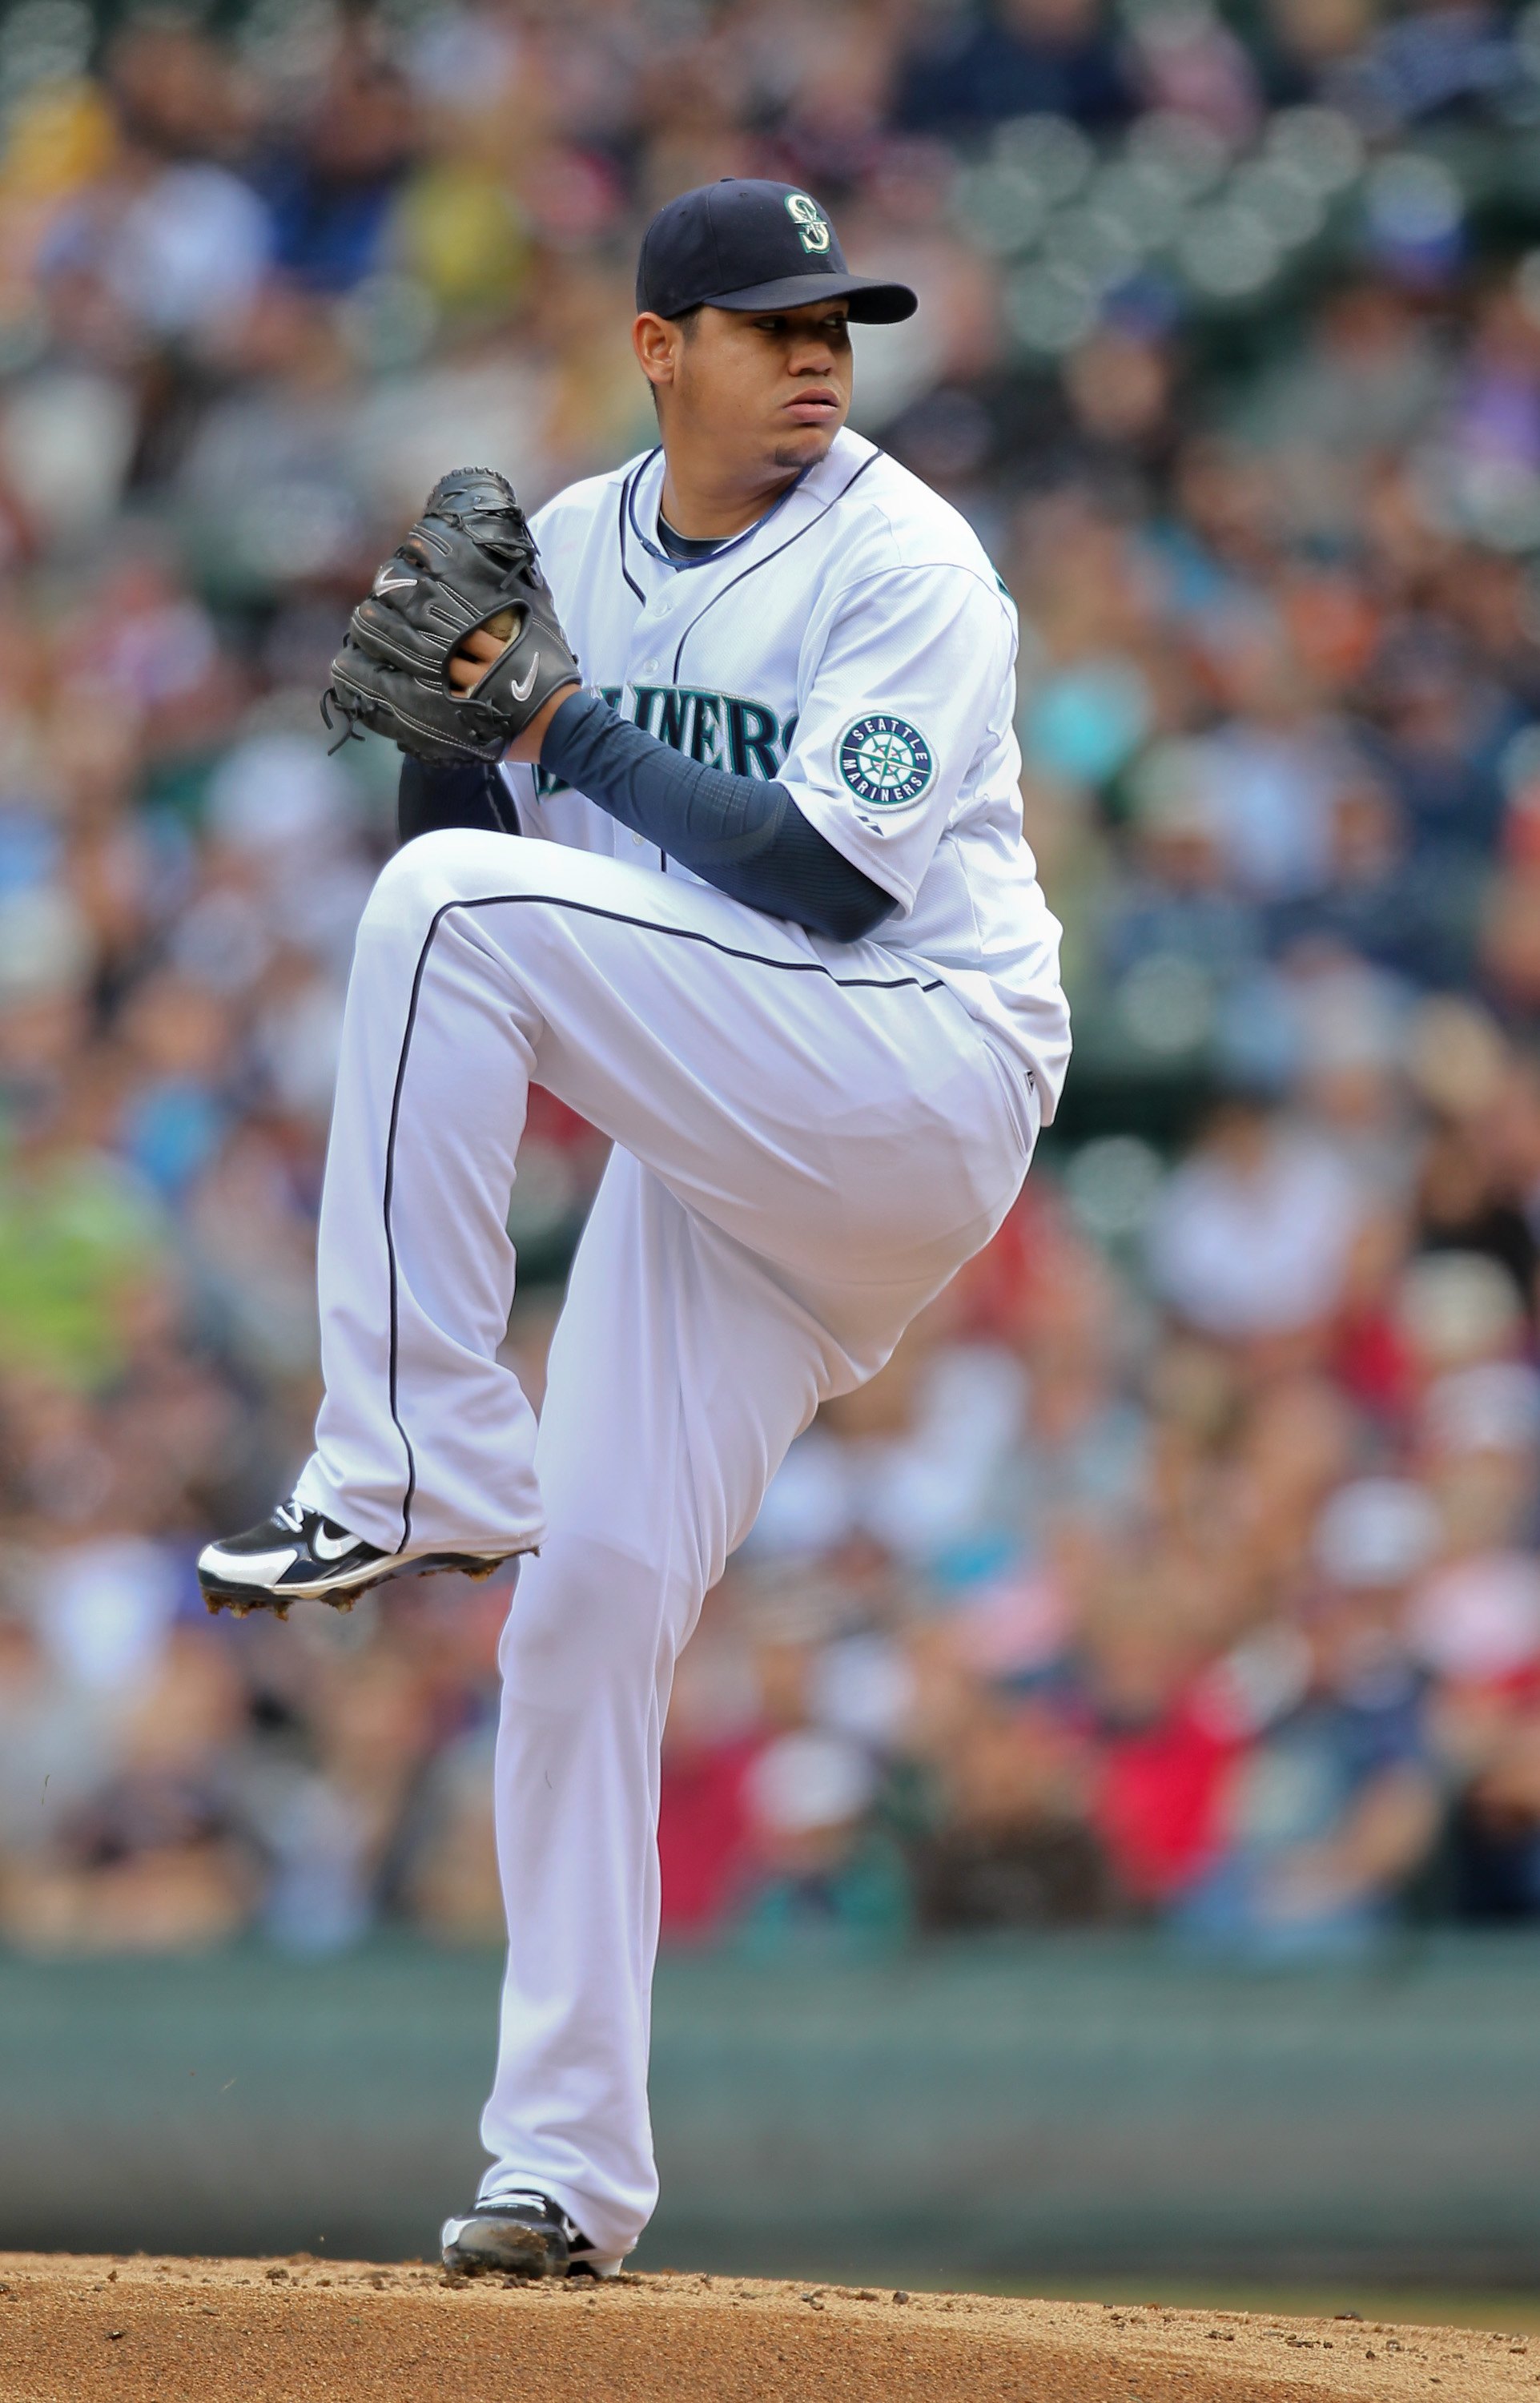 Felix Hernandez 2010 Action Poster by Unknown at